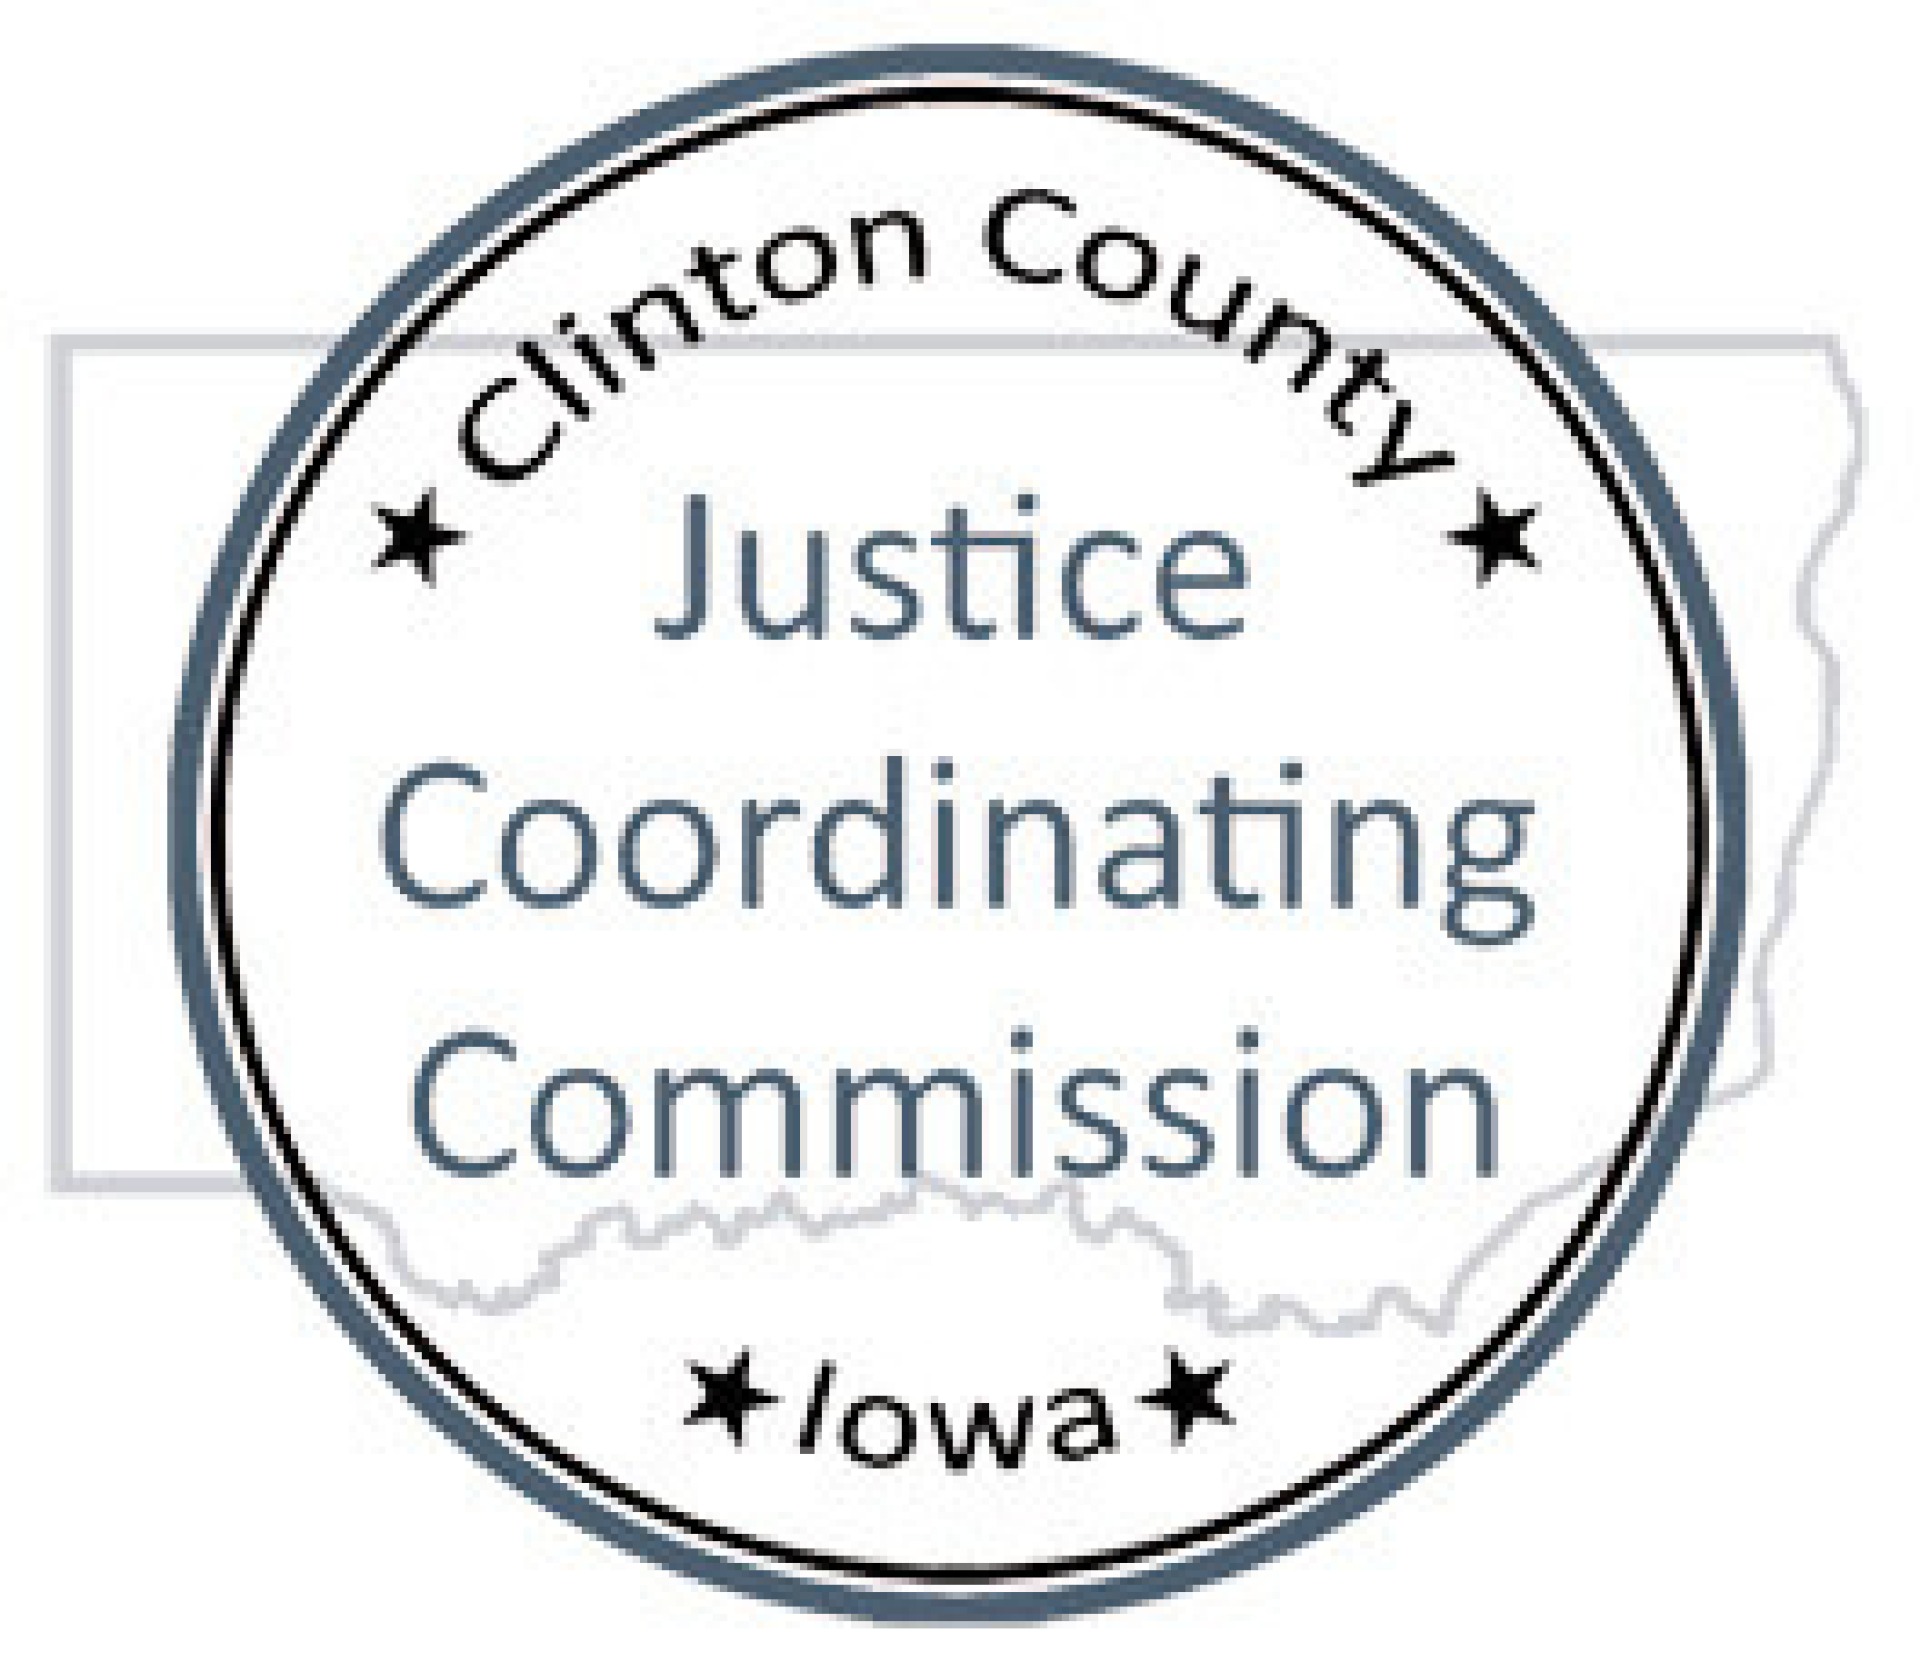 Clinton County Justice Coordinating Commission logo